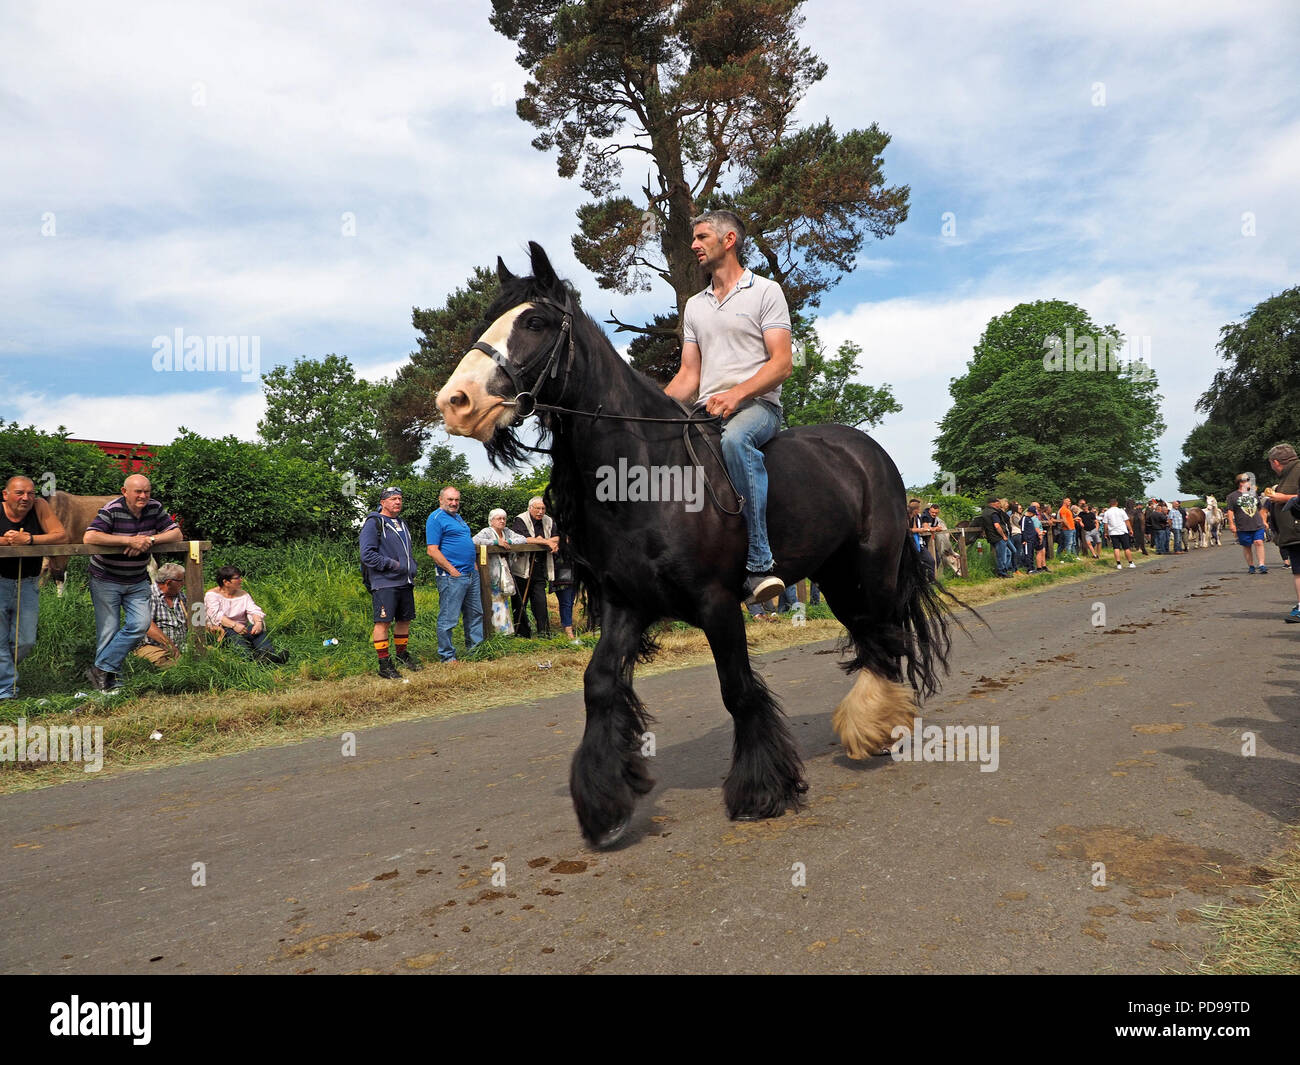 man rides black horse bareback along Fair Hill roadway amid crowds at the annual Appleby Horse fair at Appleby in Westmorland Cumbria England Stock Photo